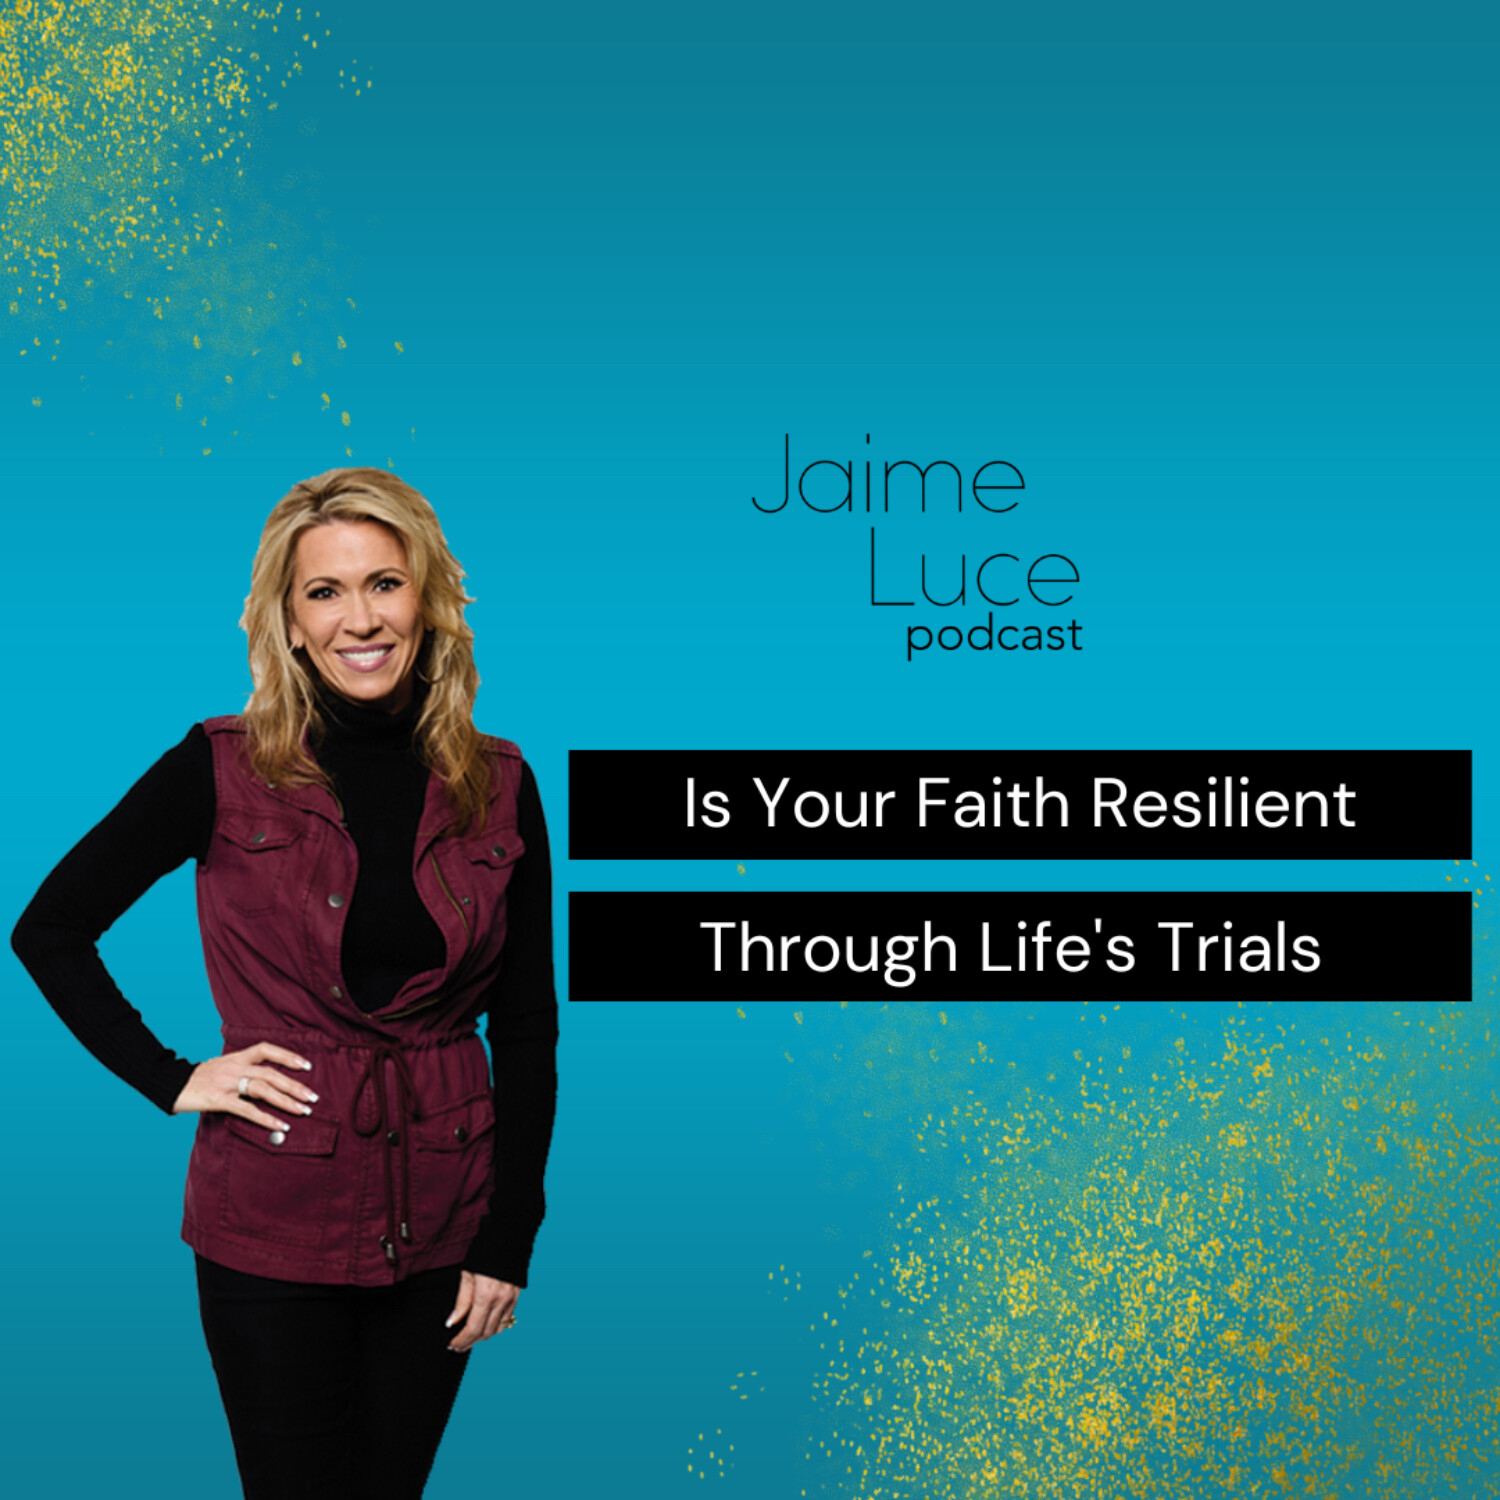 Is Your Faith Resilient Through Life's Trials